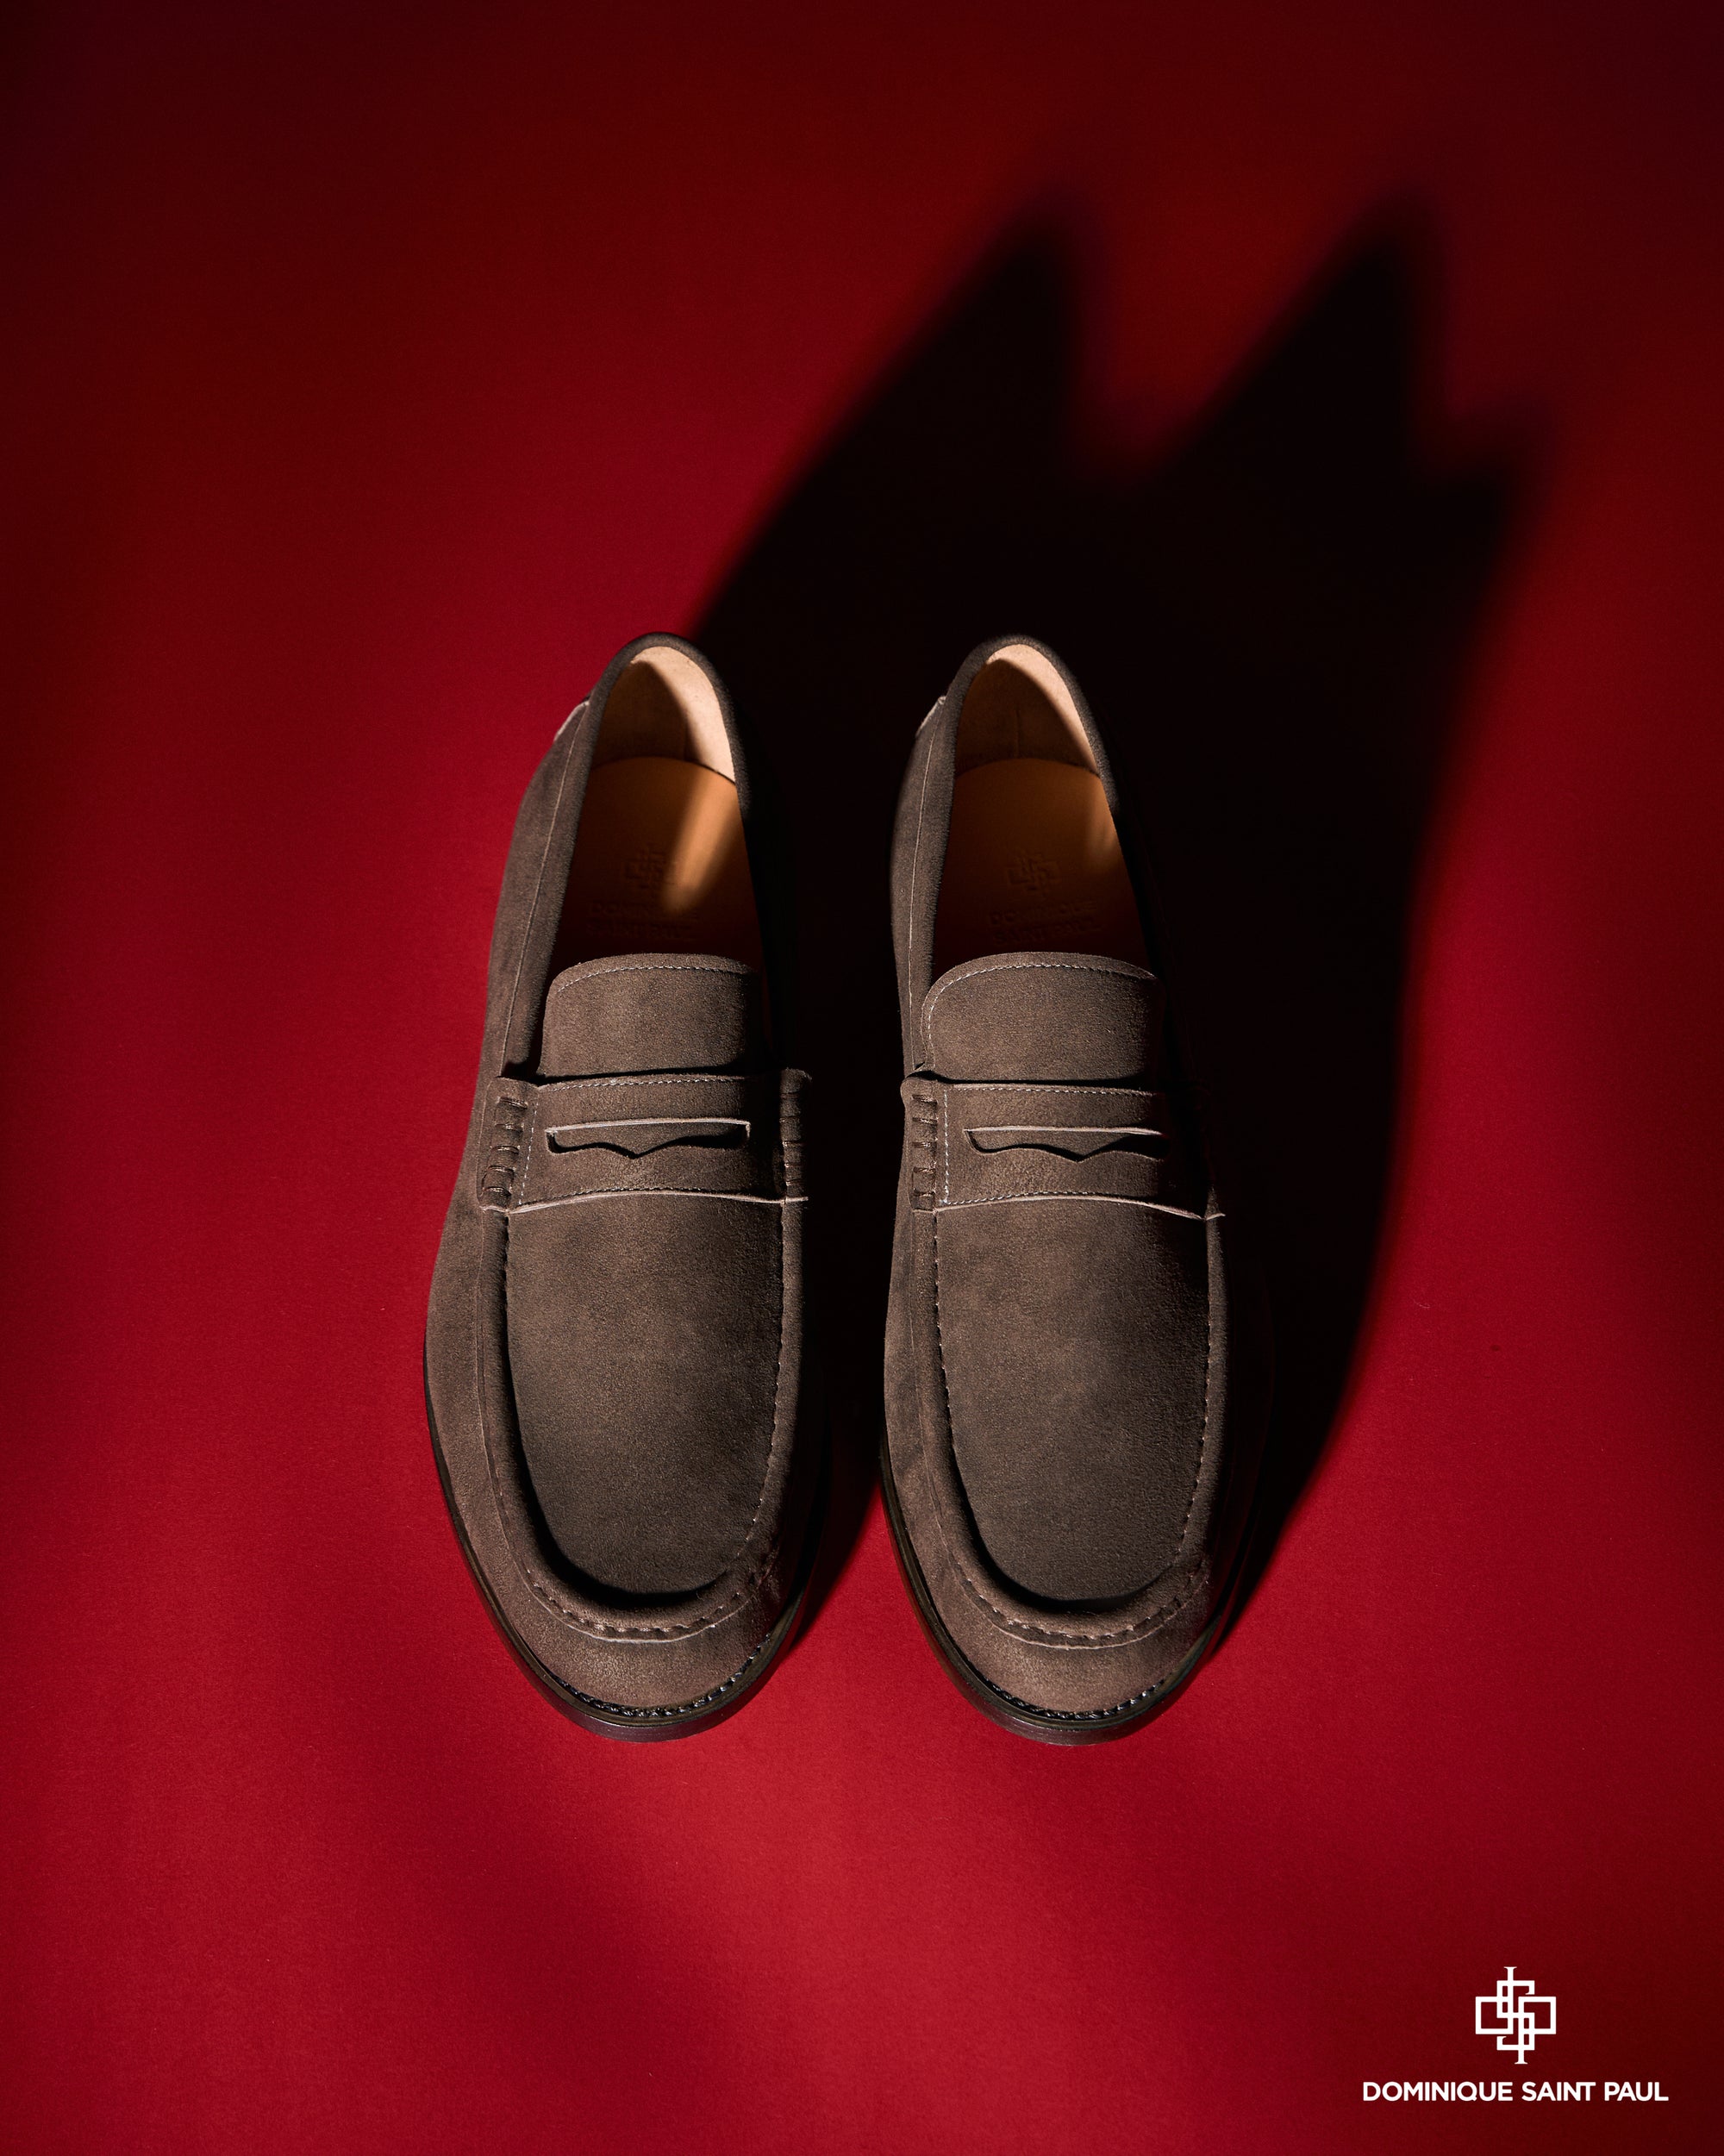 The History of Loafers